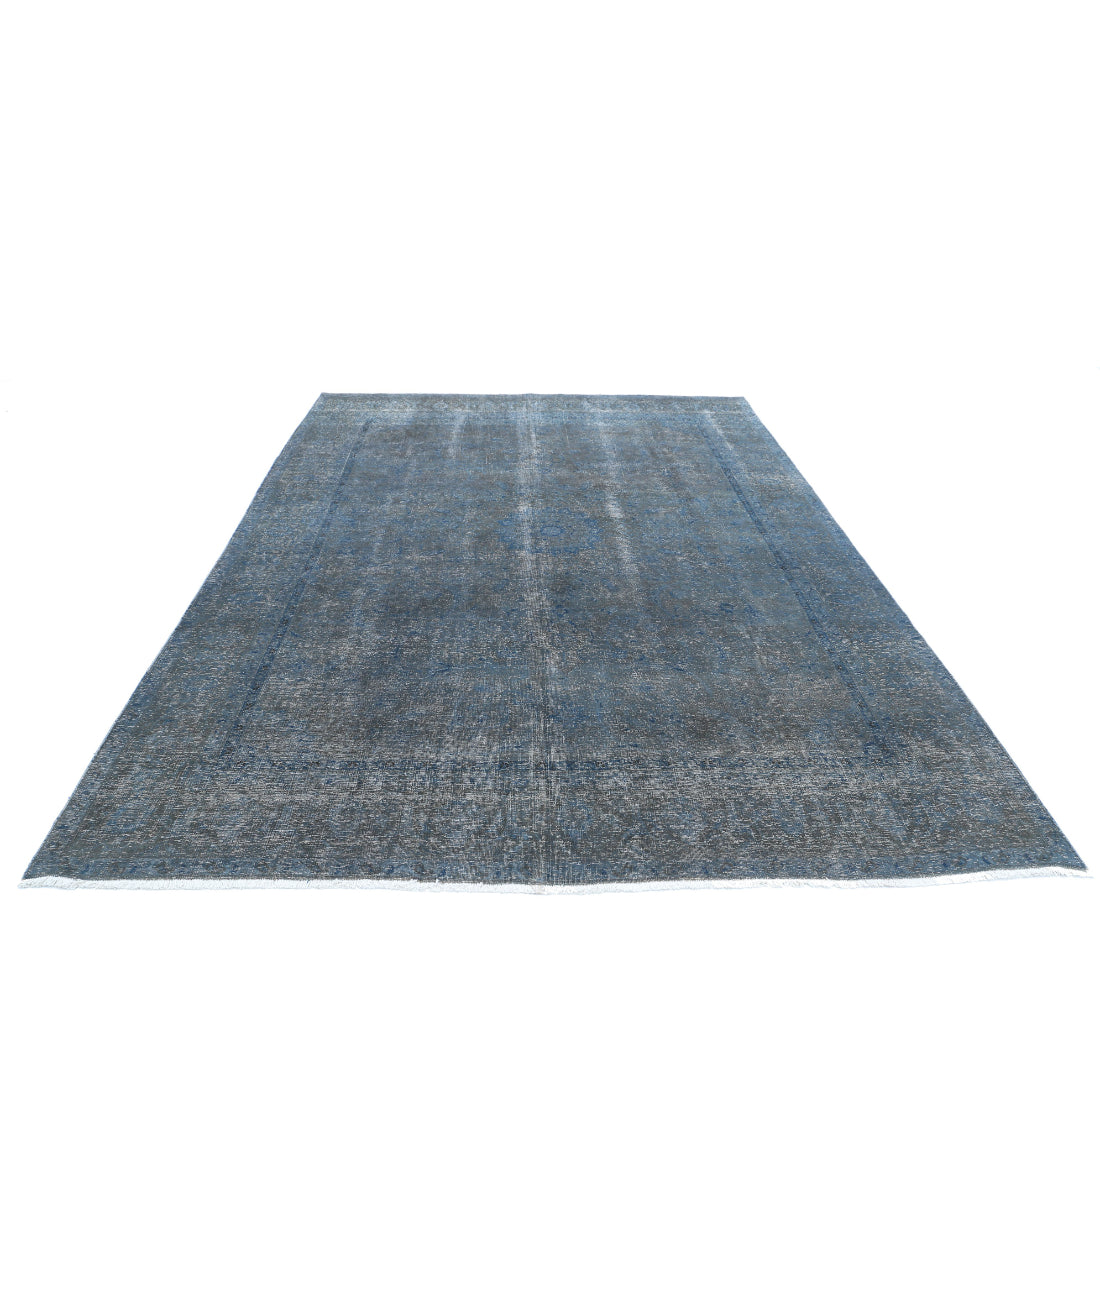 Hand Knotted Transitional Overdye Mashad Wool Rug - 7'8'' x 10'11'' 7'8'' x 10'11'' (230 X 328) / Blue / Charcoal